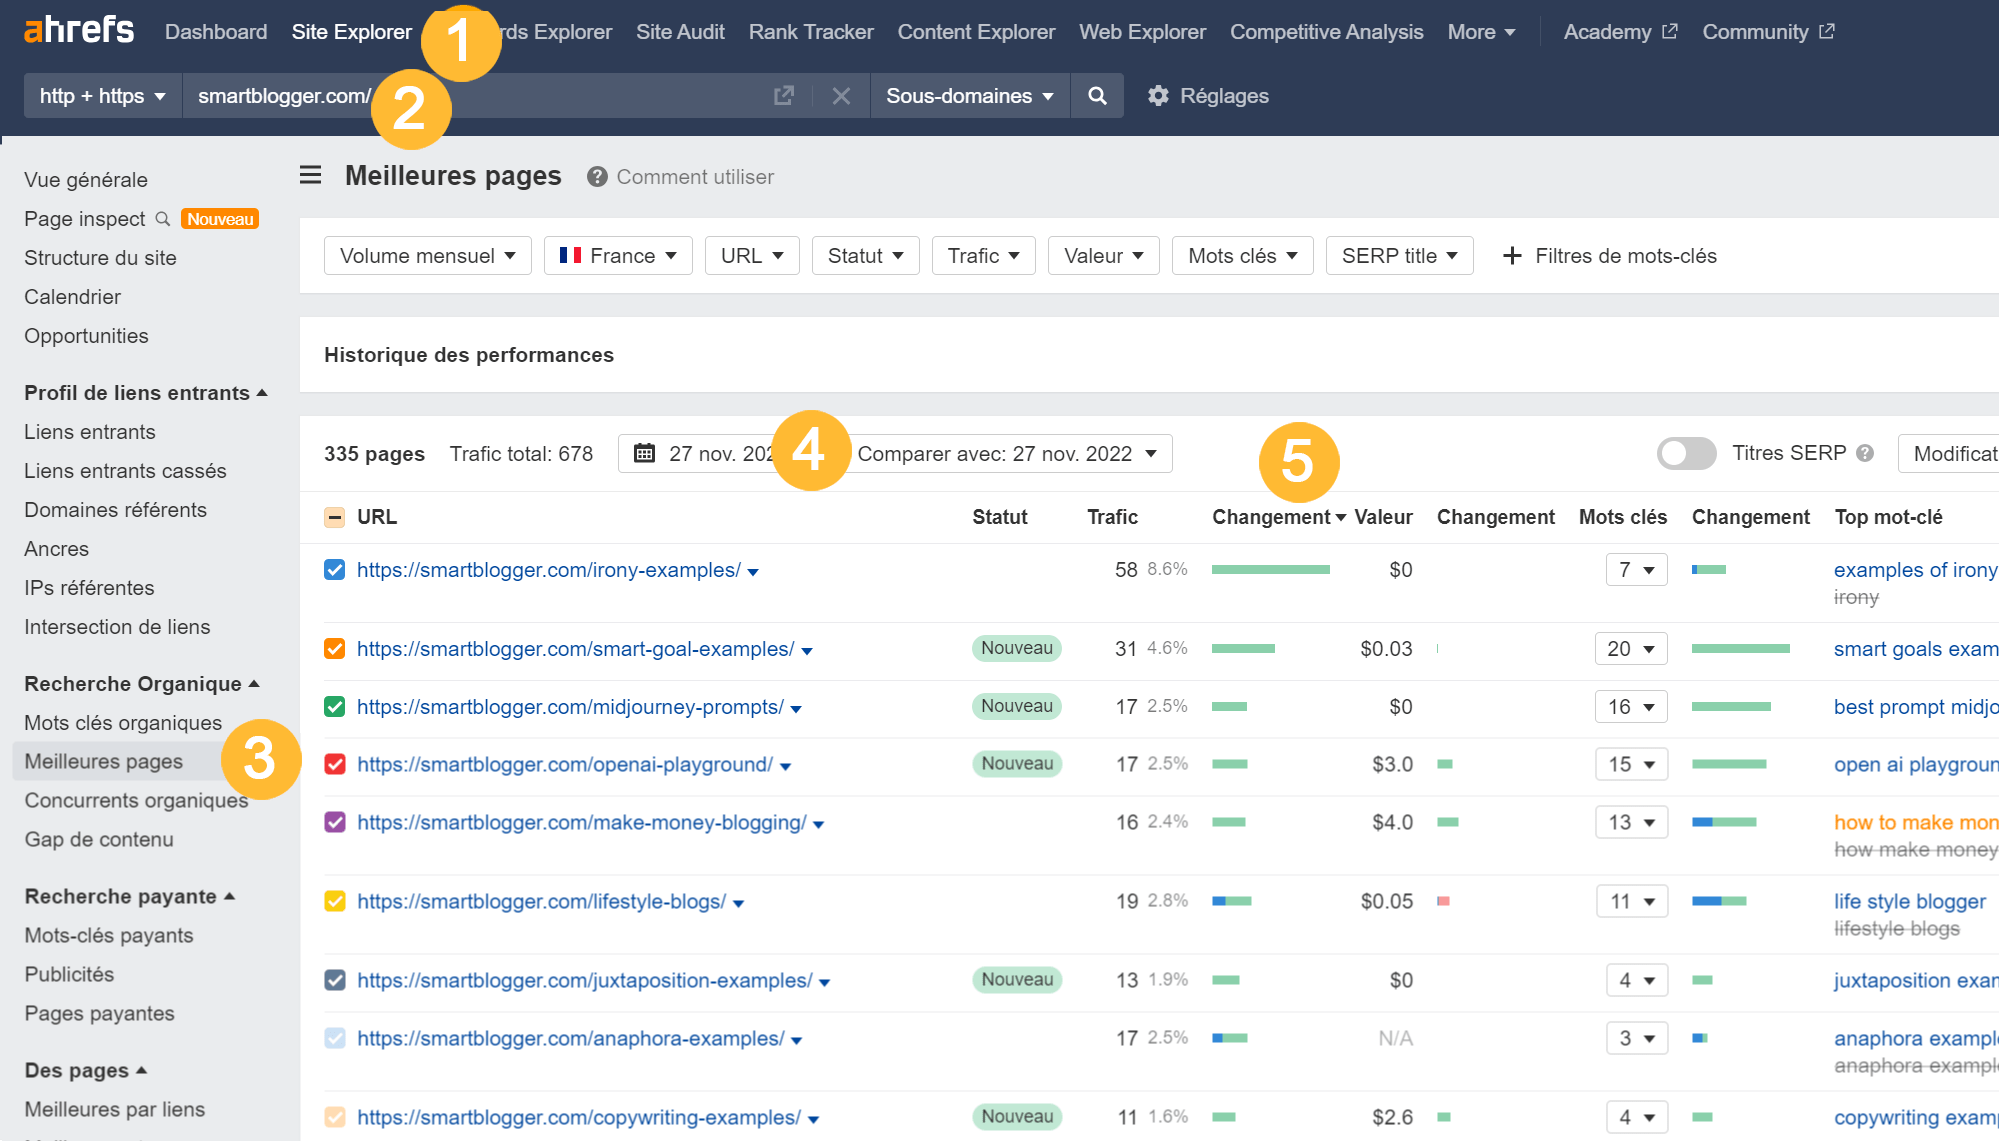 Using Ahrefs' Site Explorer to find declines in traffic for your target blog so you can pitch it an update